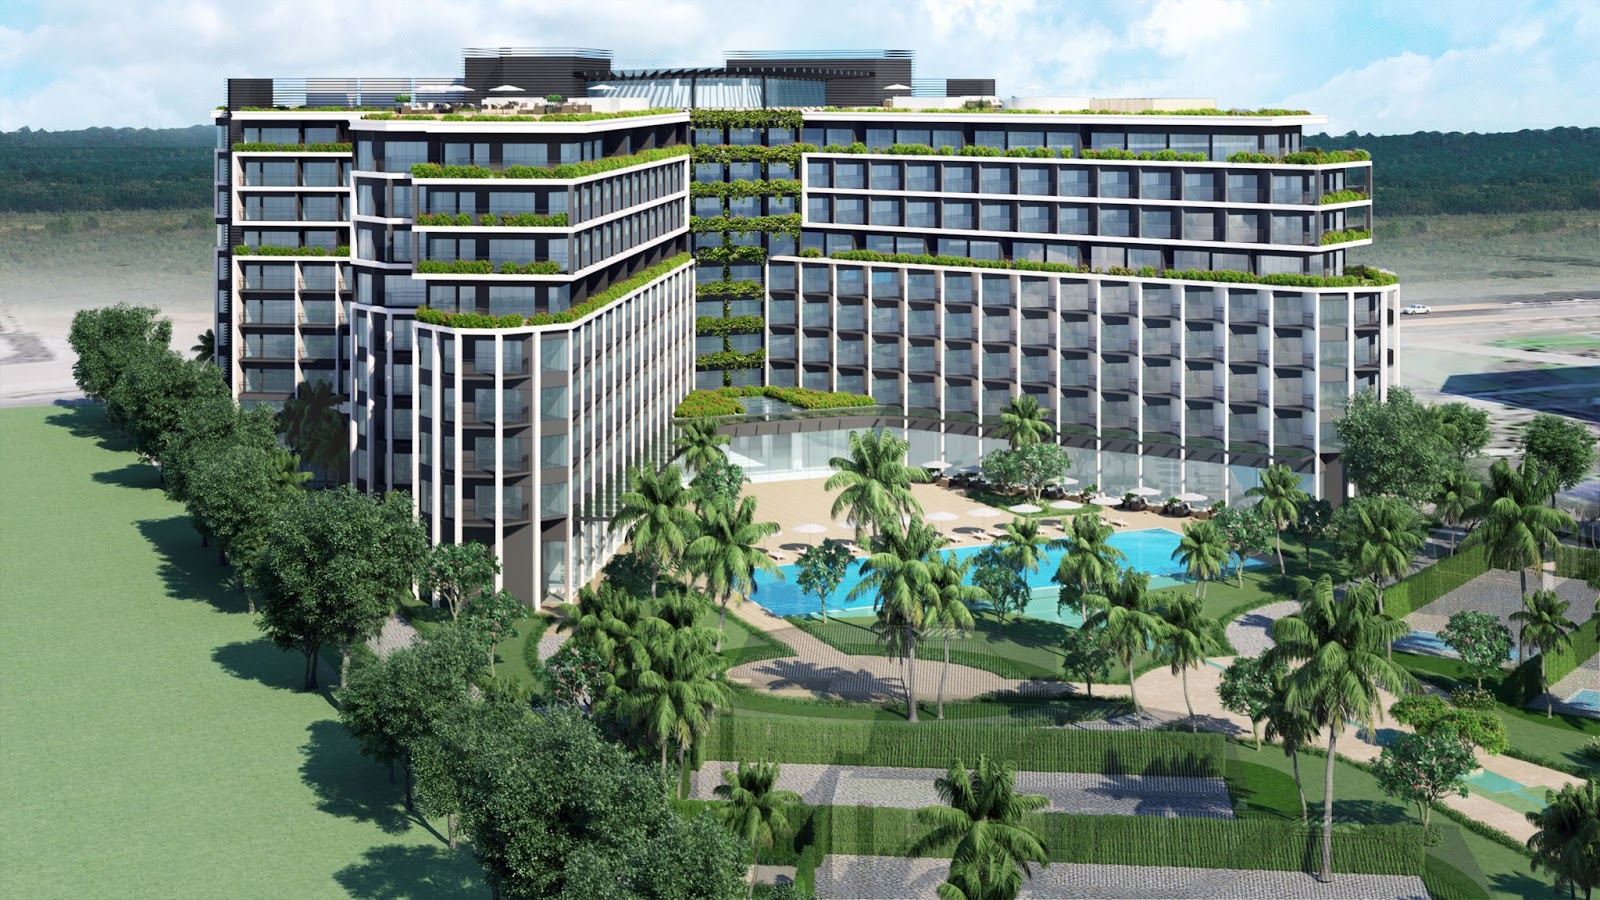 Perspective of a condotel project in Phu Quoc Island, Kien Giang Province is offered on the market. Condotels are expected to be attractive products on the market in the future. (Photo: dauthau.vn)